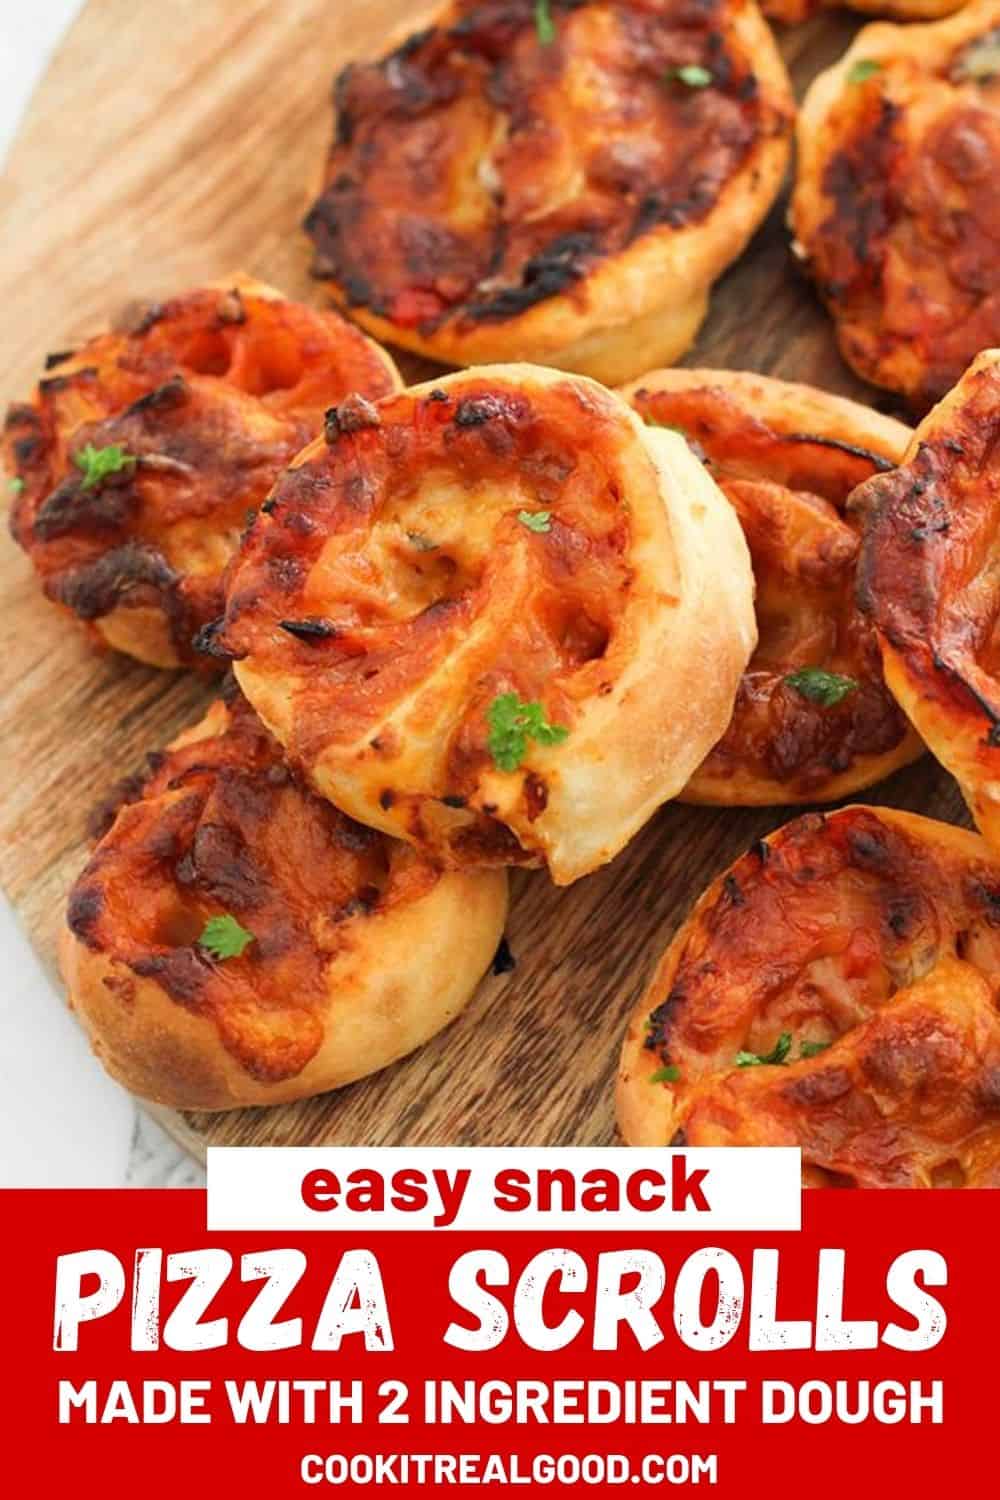 Pizza Scrolls - Cook it Real Good